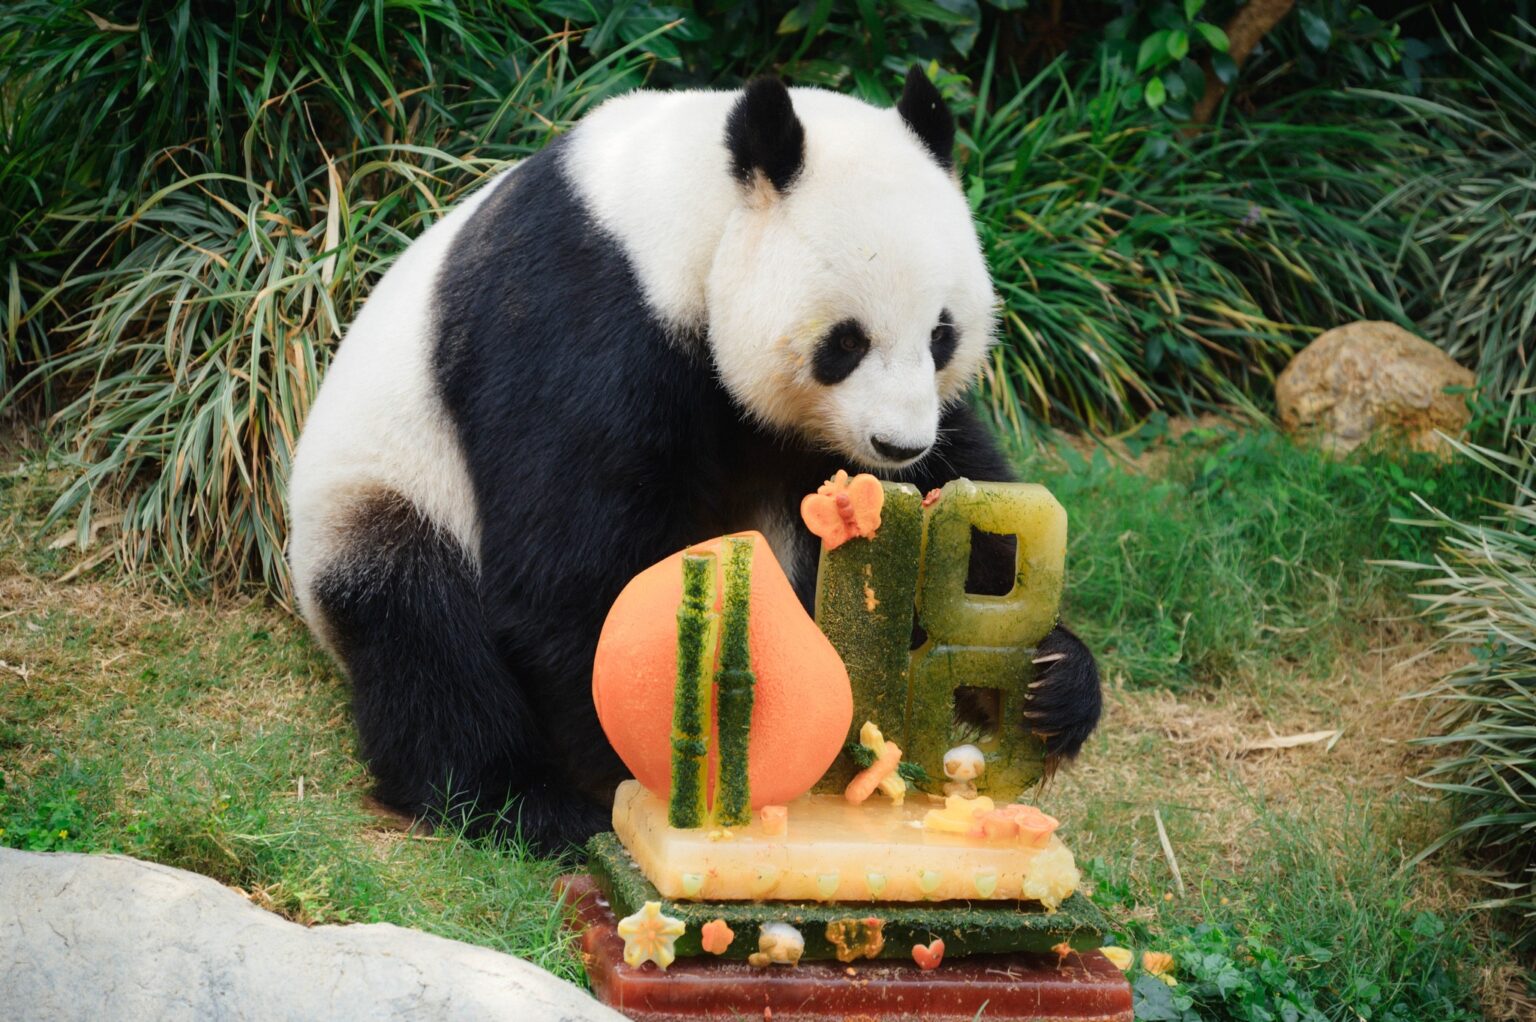 One of the Ocean Park pandas sits in front of a birthday cake. The peach-and-orange-hued cake has an '18' age topper that is made out of freen ice lollies.